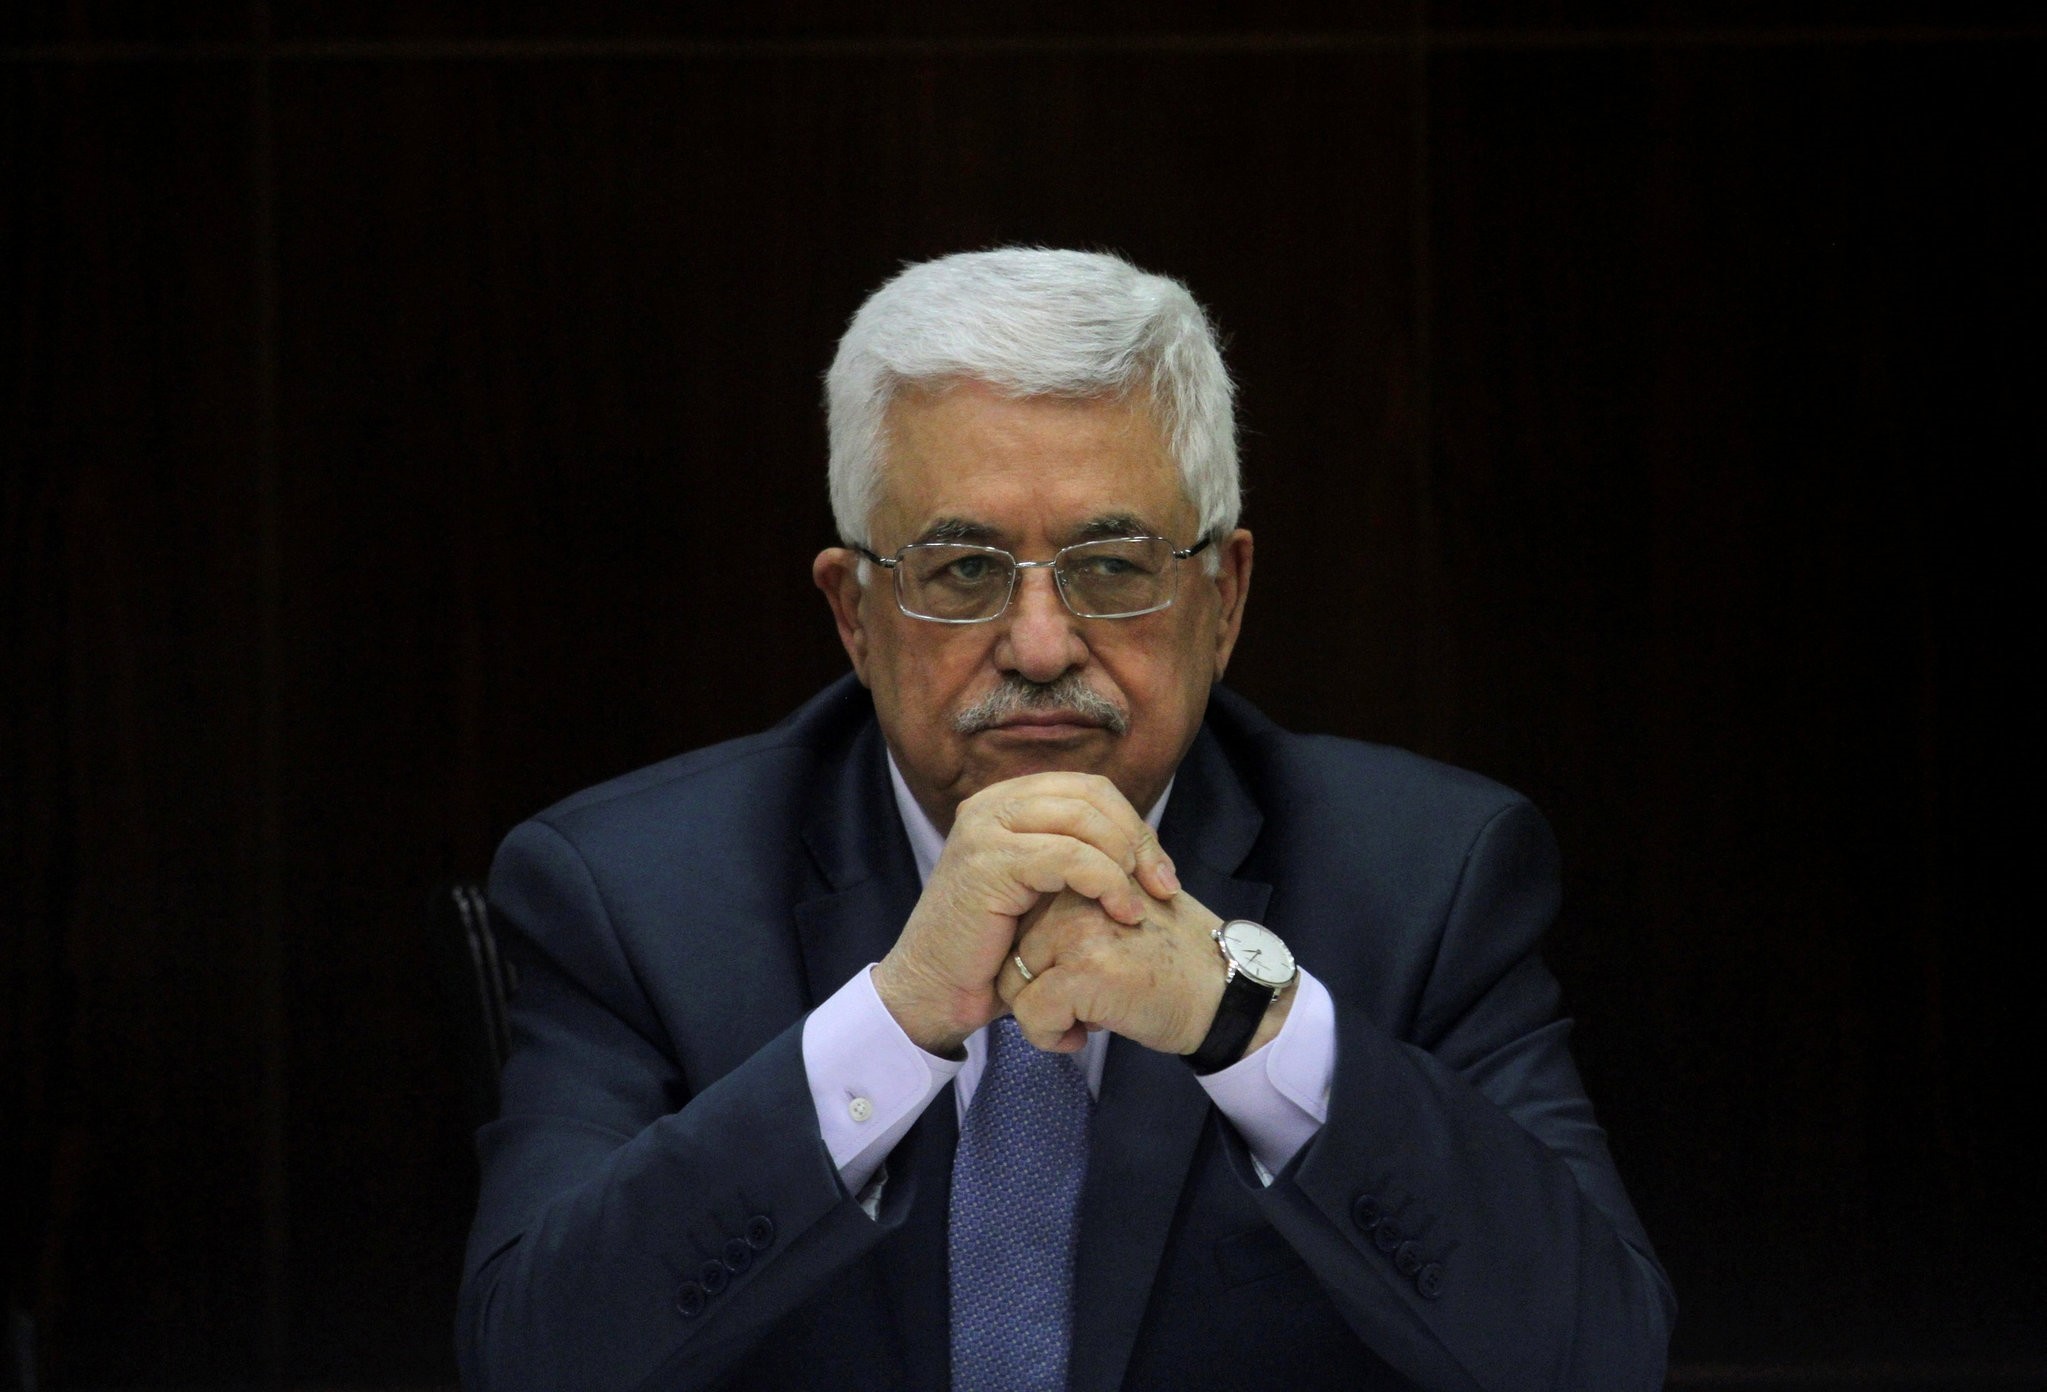 Palestinian President Mahmoud Abbas heads a Palestinian cabinet meeting in the West Bank city of Ramallah July 28, 2013. (REUTERS Photo)